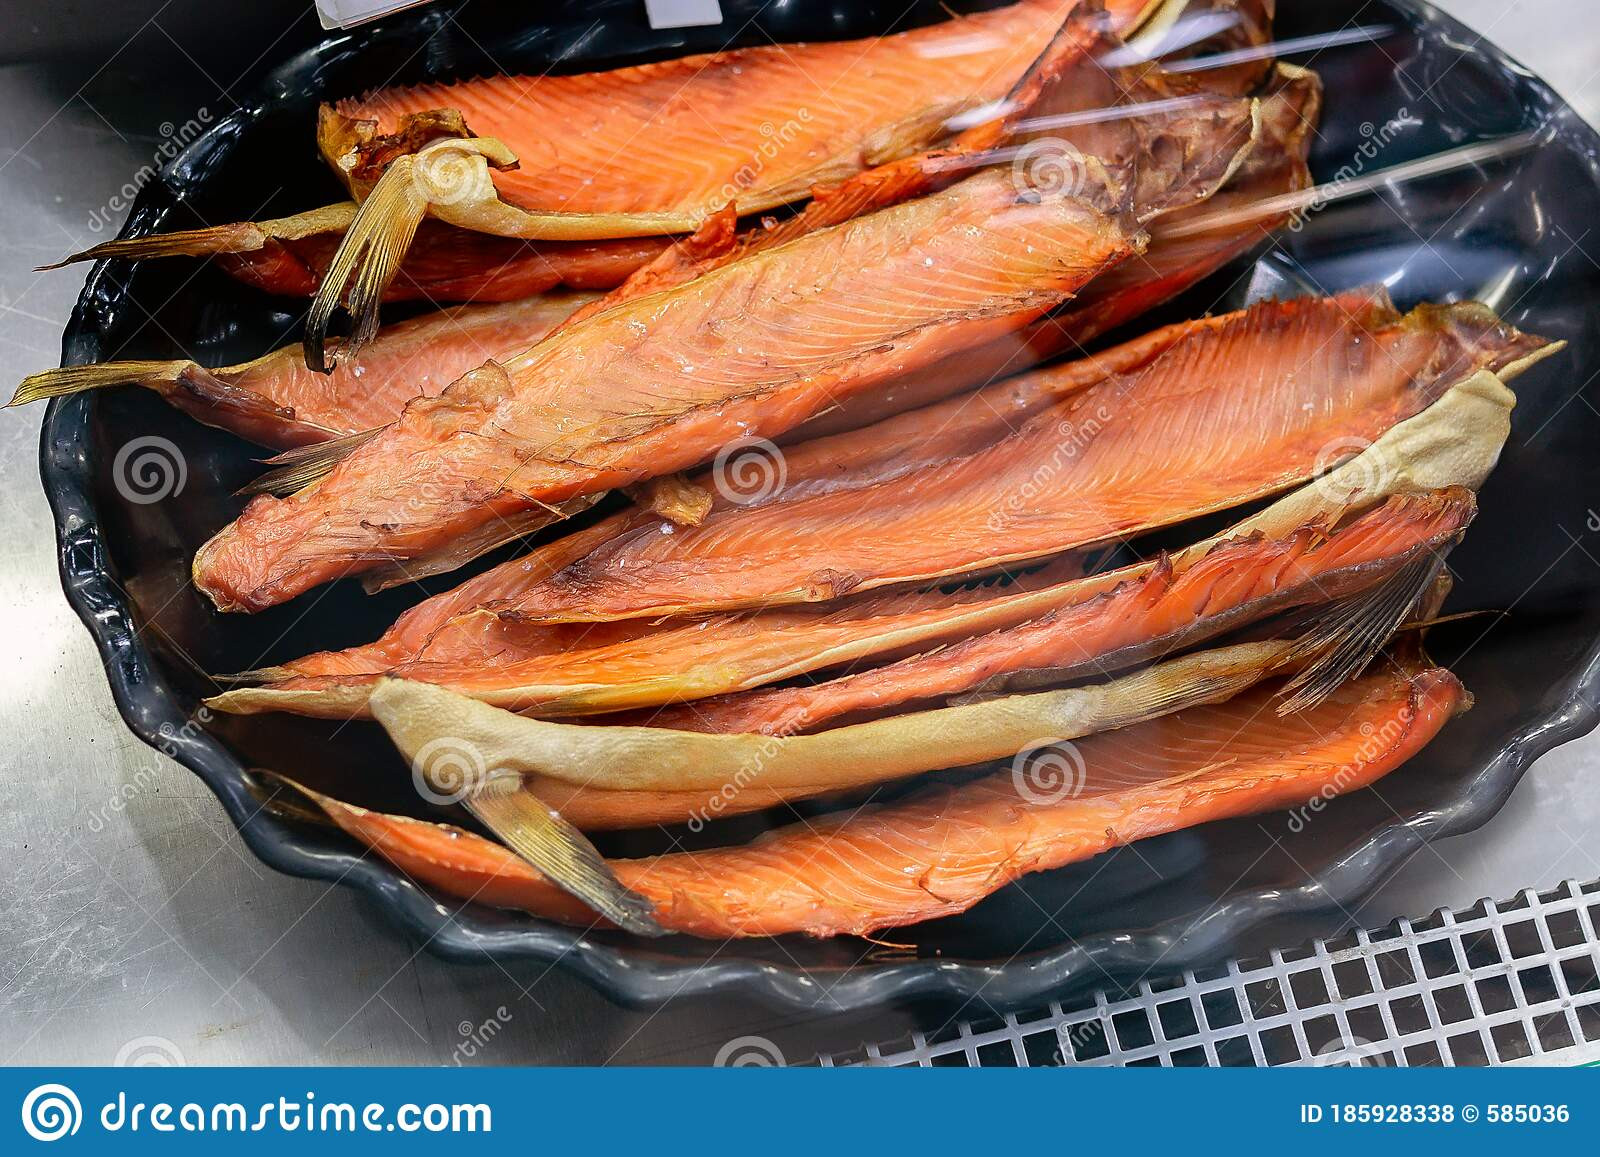 Smoked Salmon For Sale
 Smoked Salmon Fish The Market Shelves Fish For Sale In